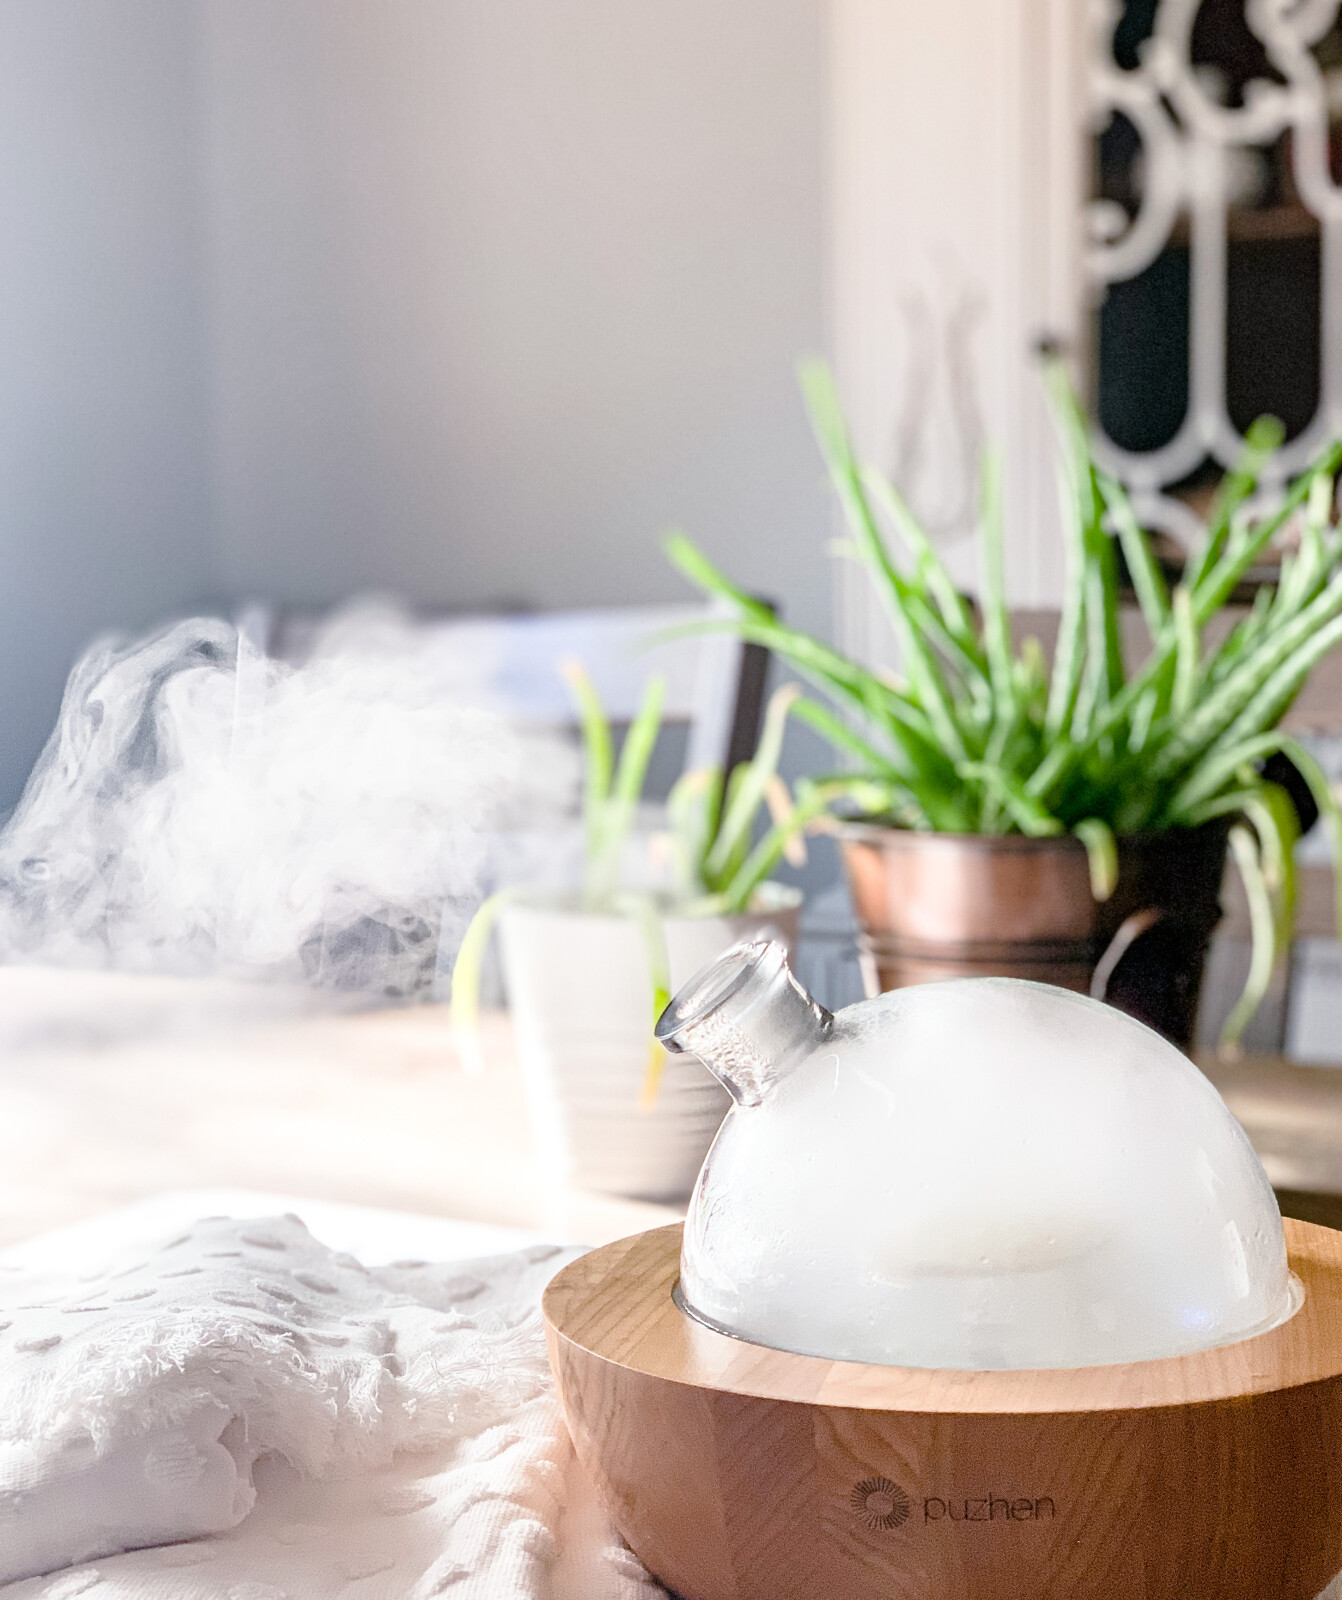 Diffuser recipes that warm your heart